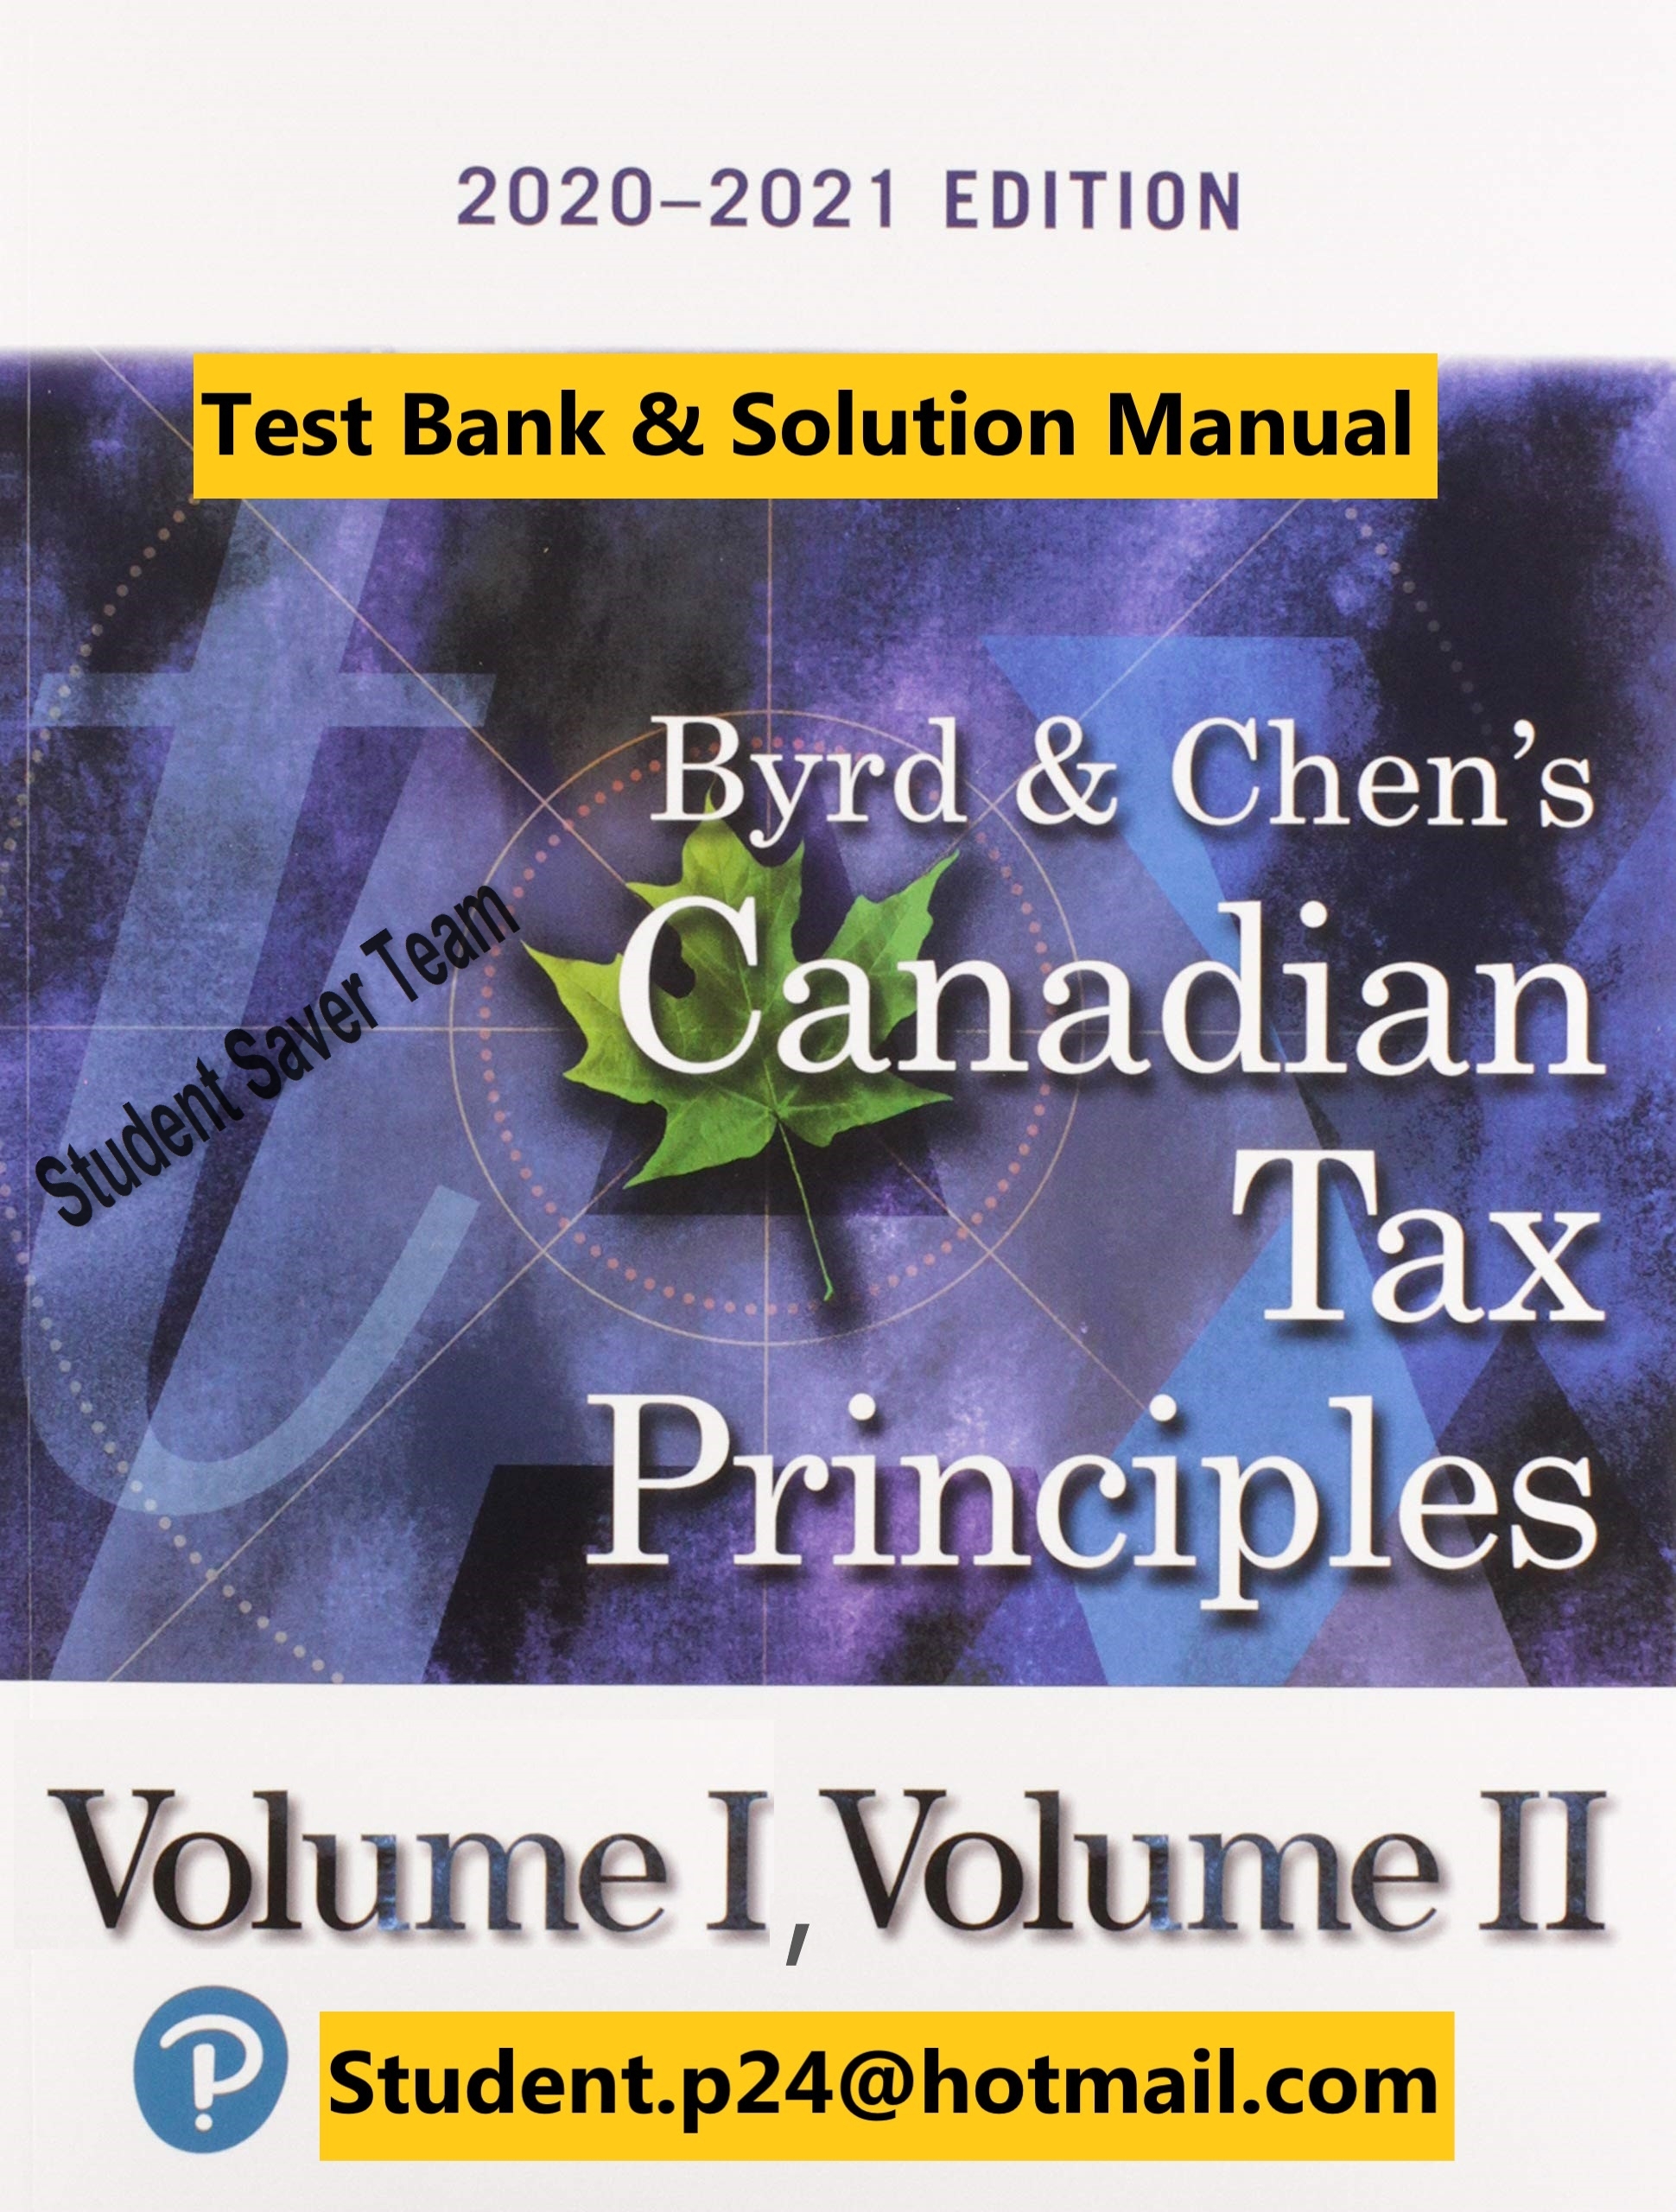 Canadian Tax Principles 2020-2021 Byrd Chens Test Bank Solution Manual